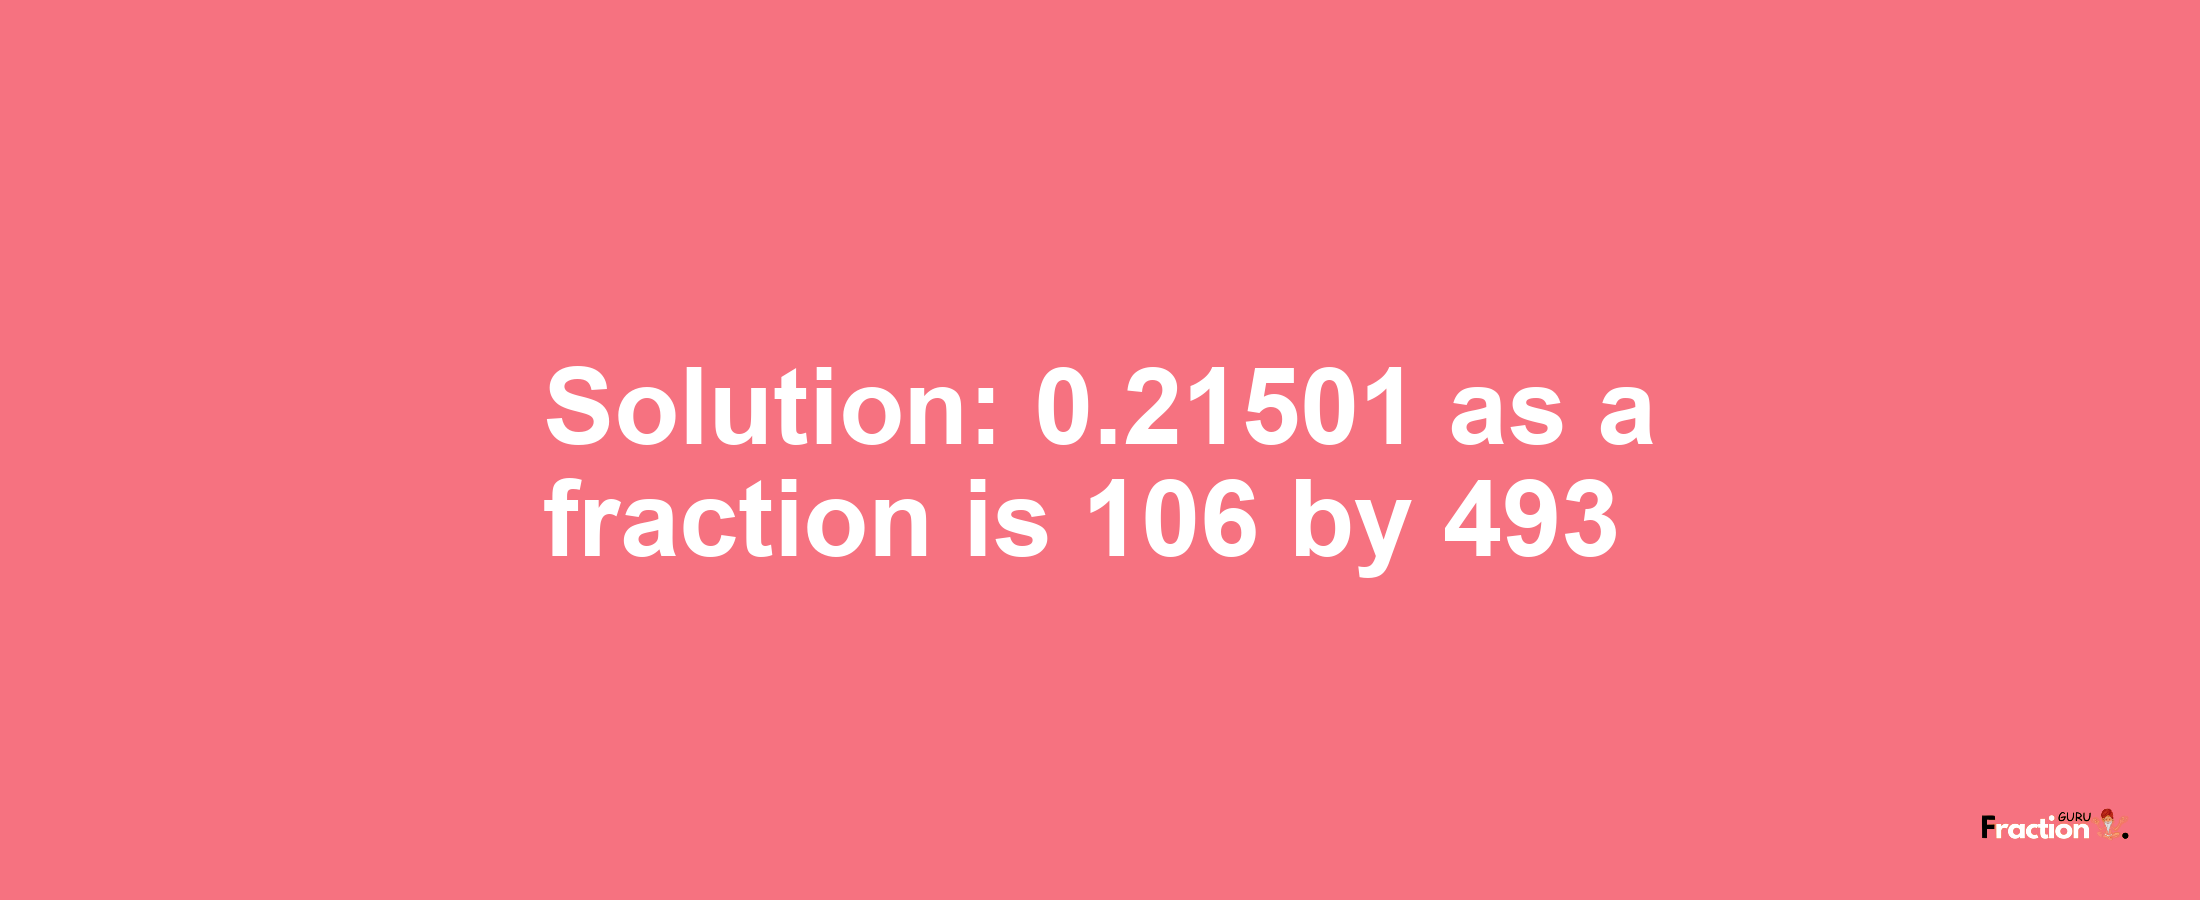 Solution:0.21501 as a fraction is 106/493